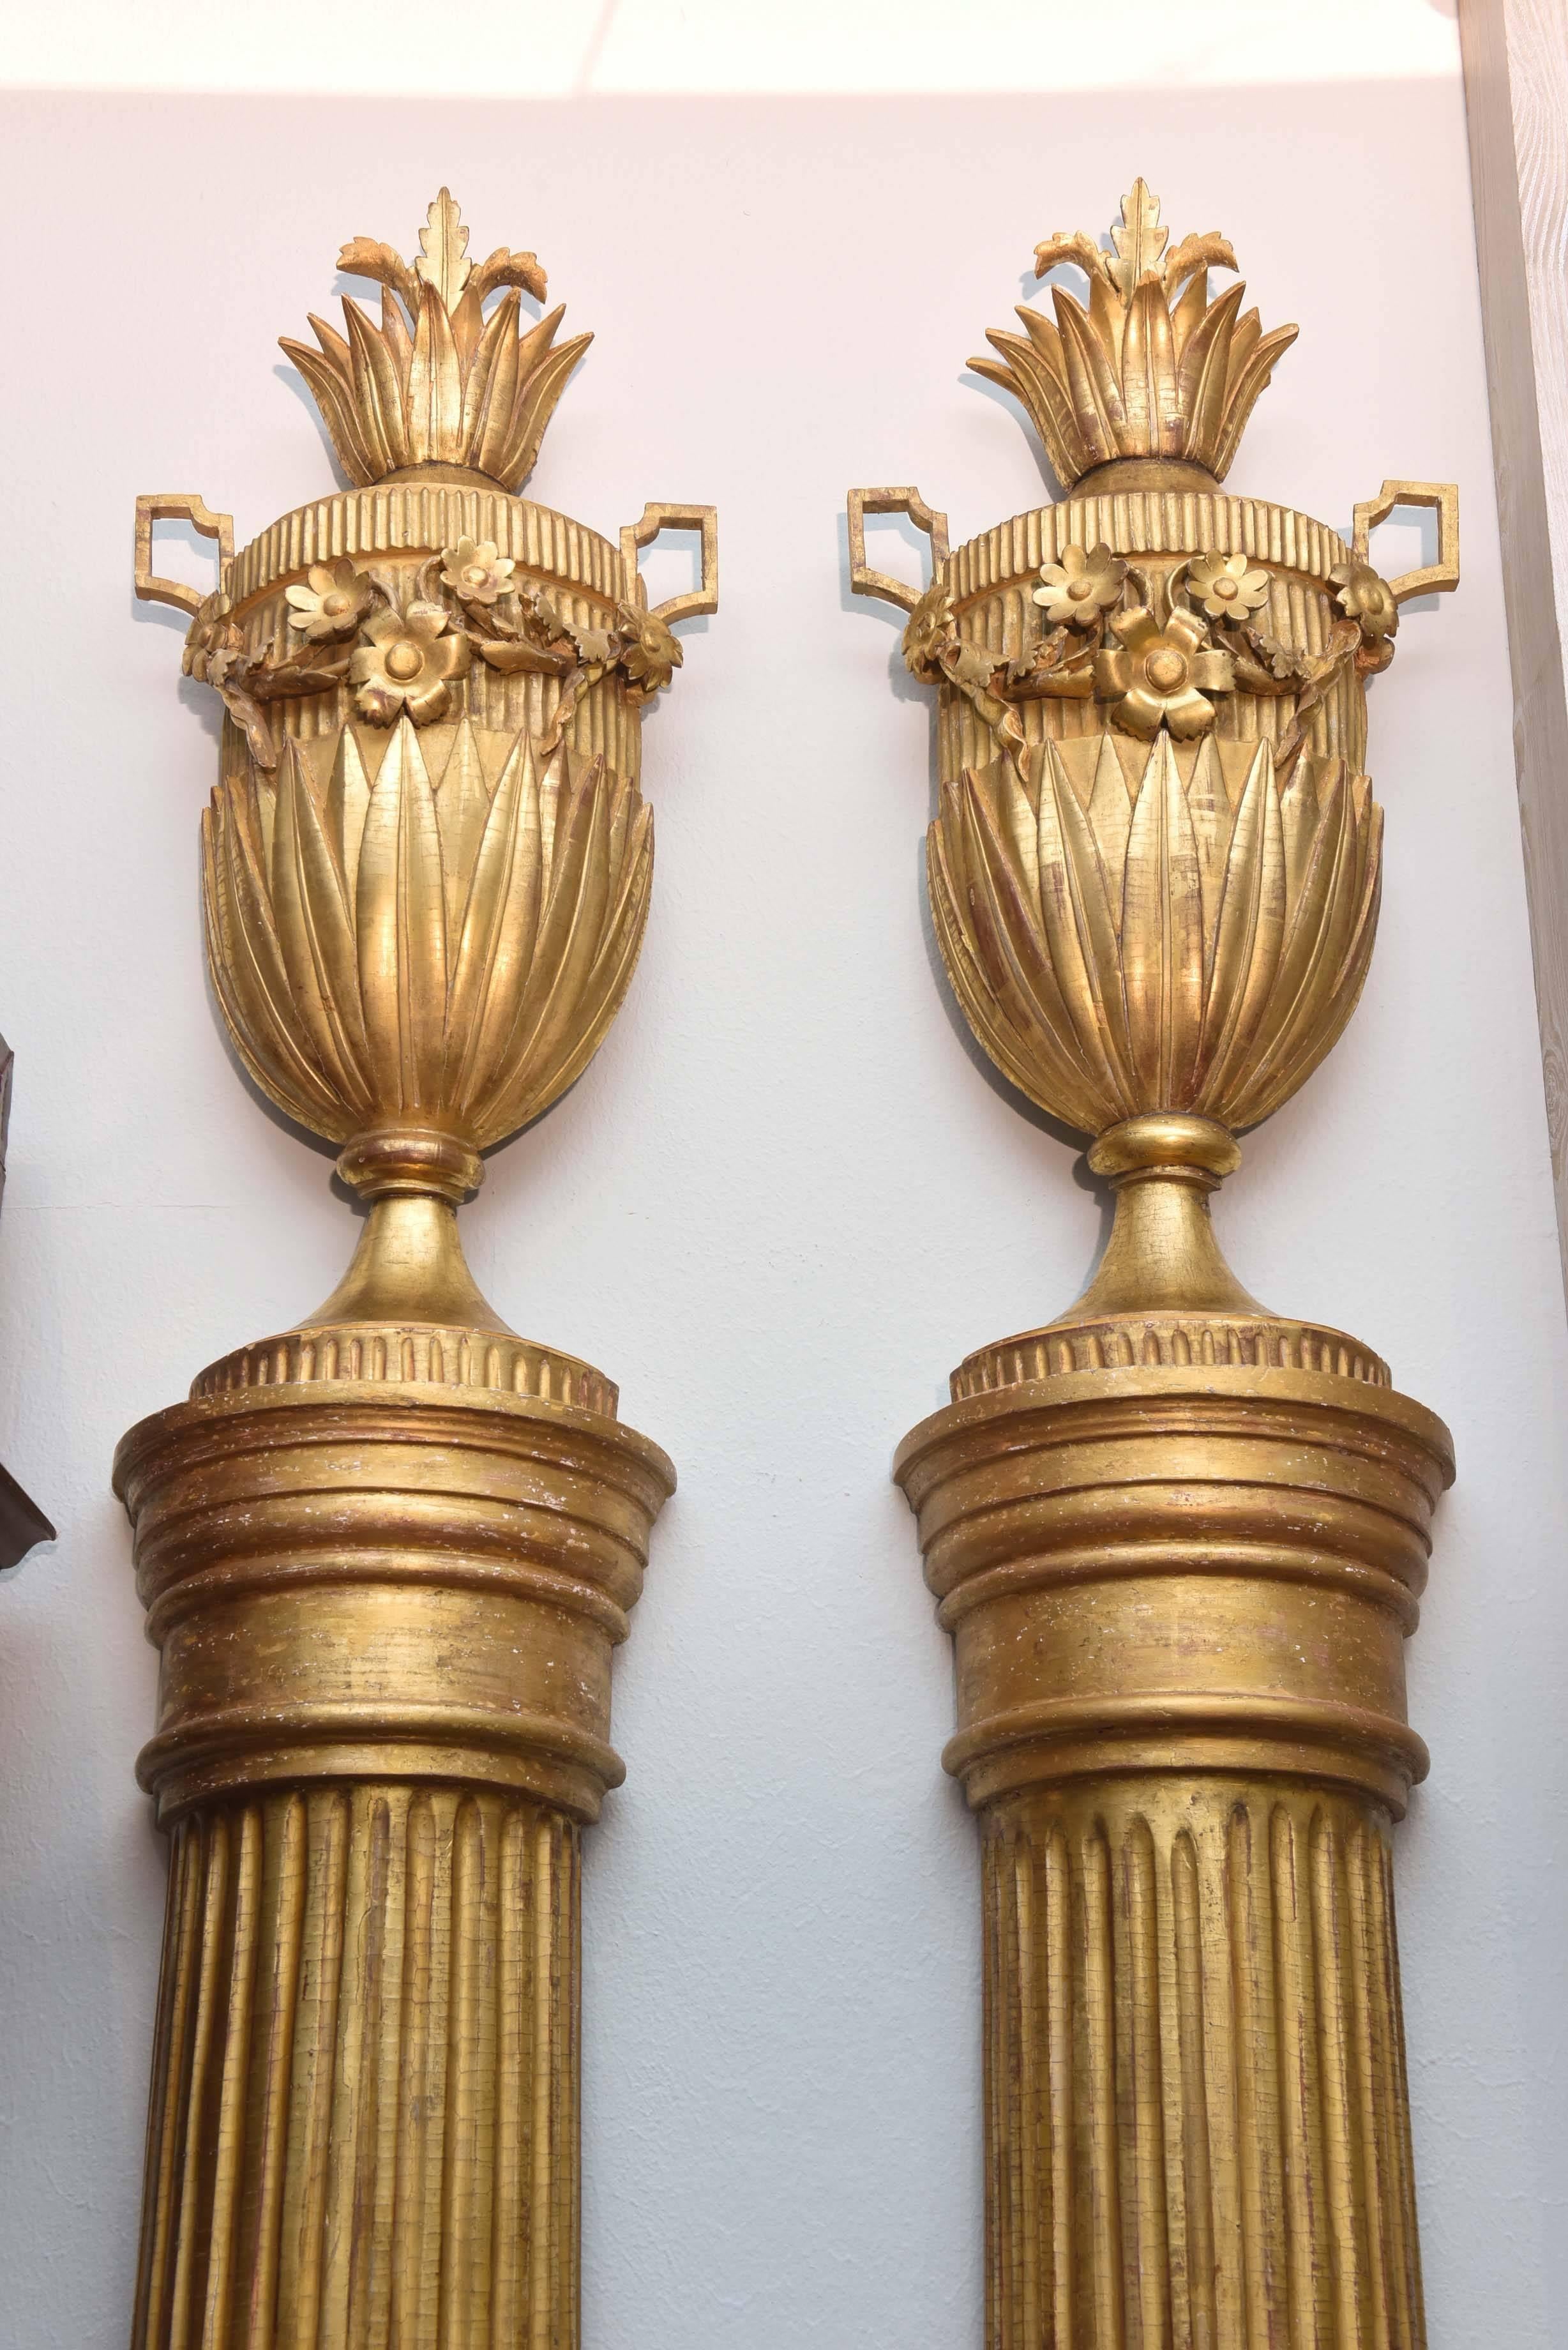 Magnificently carved, gilded and proportioned historic architectural elements, circa 1812. The urns, alone, are 33" tall and detachable from columns.

